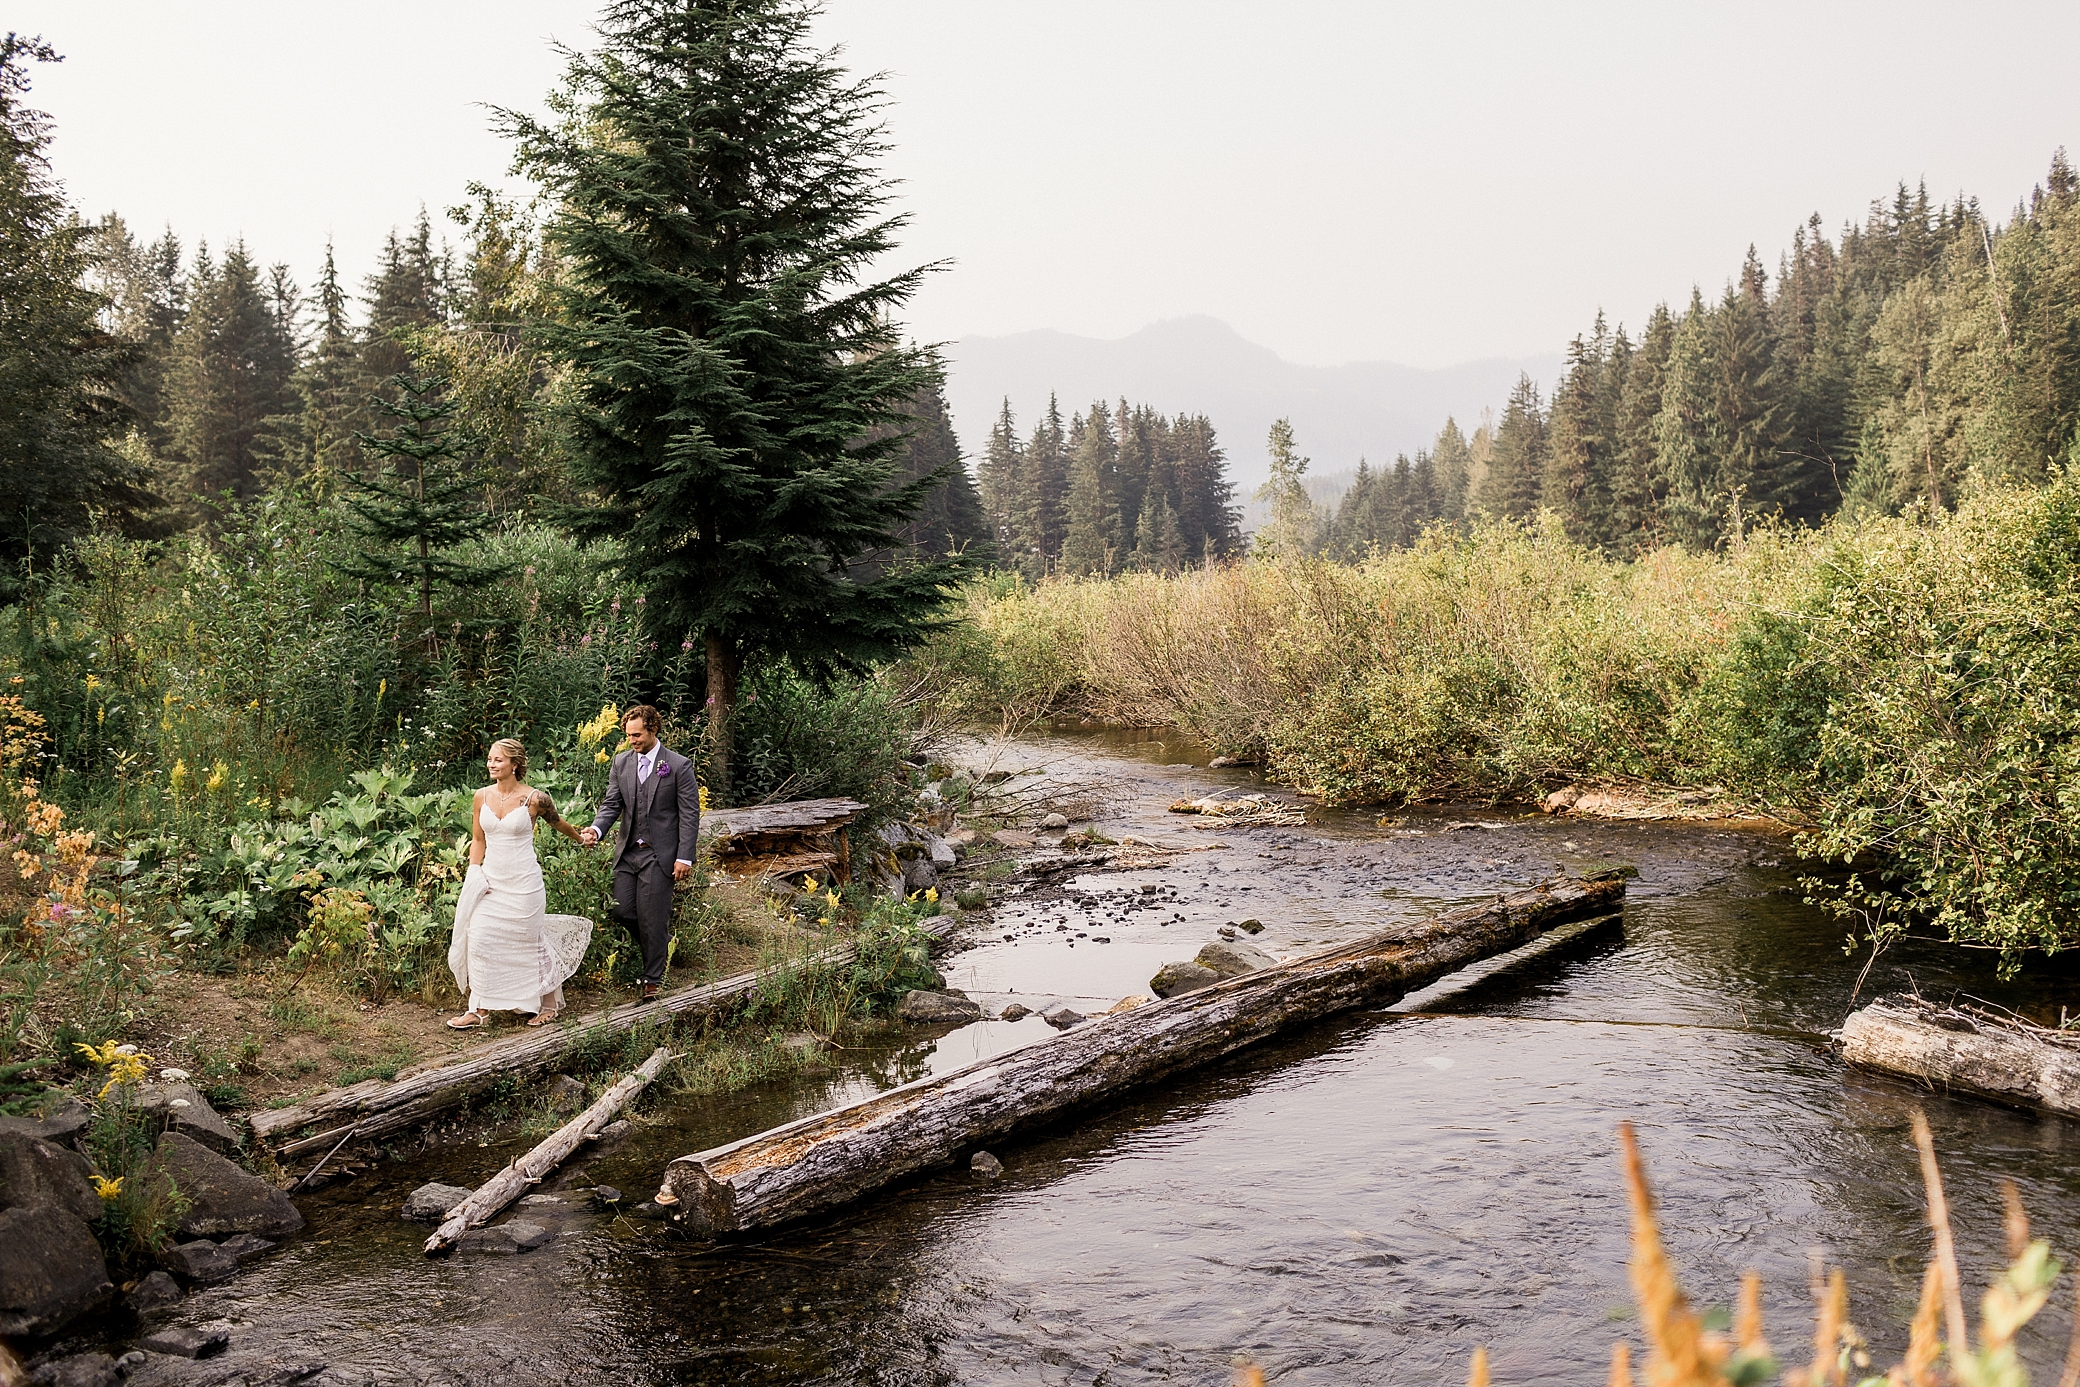 Elopement in the PNW Mountains photographed by Seattle Elopement Photographer, Megan Montalvo Photography